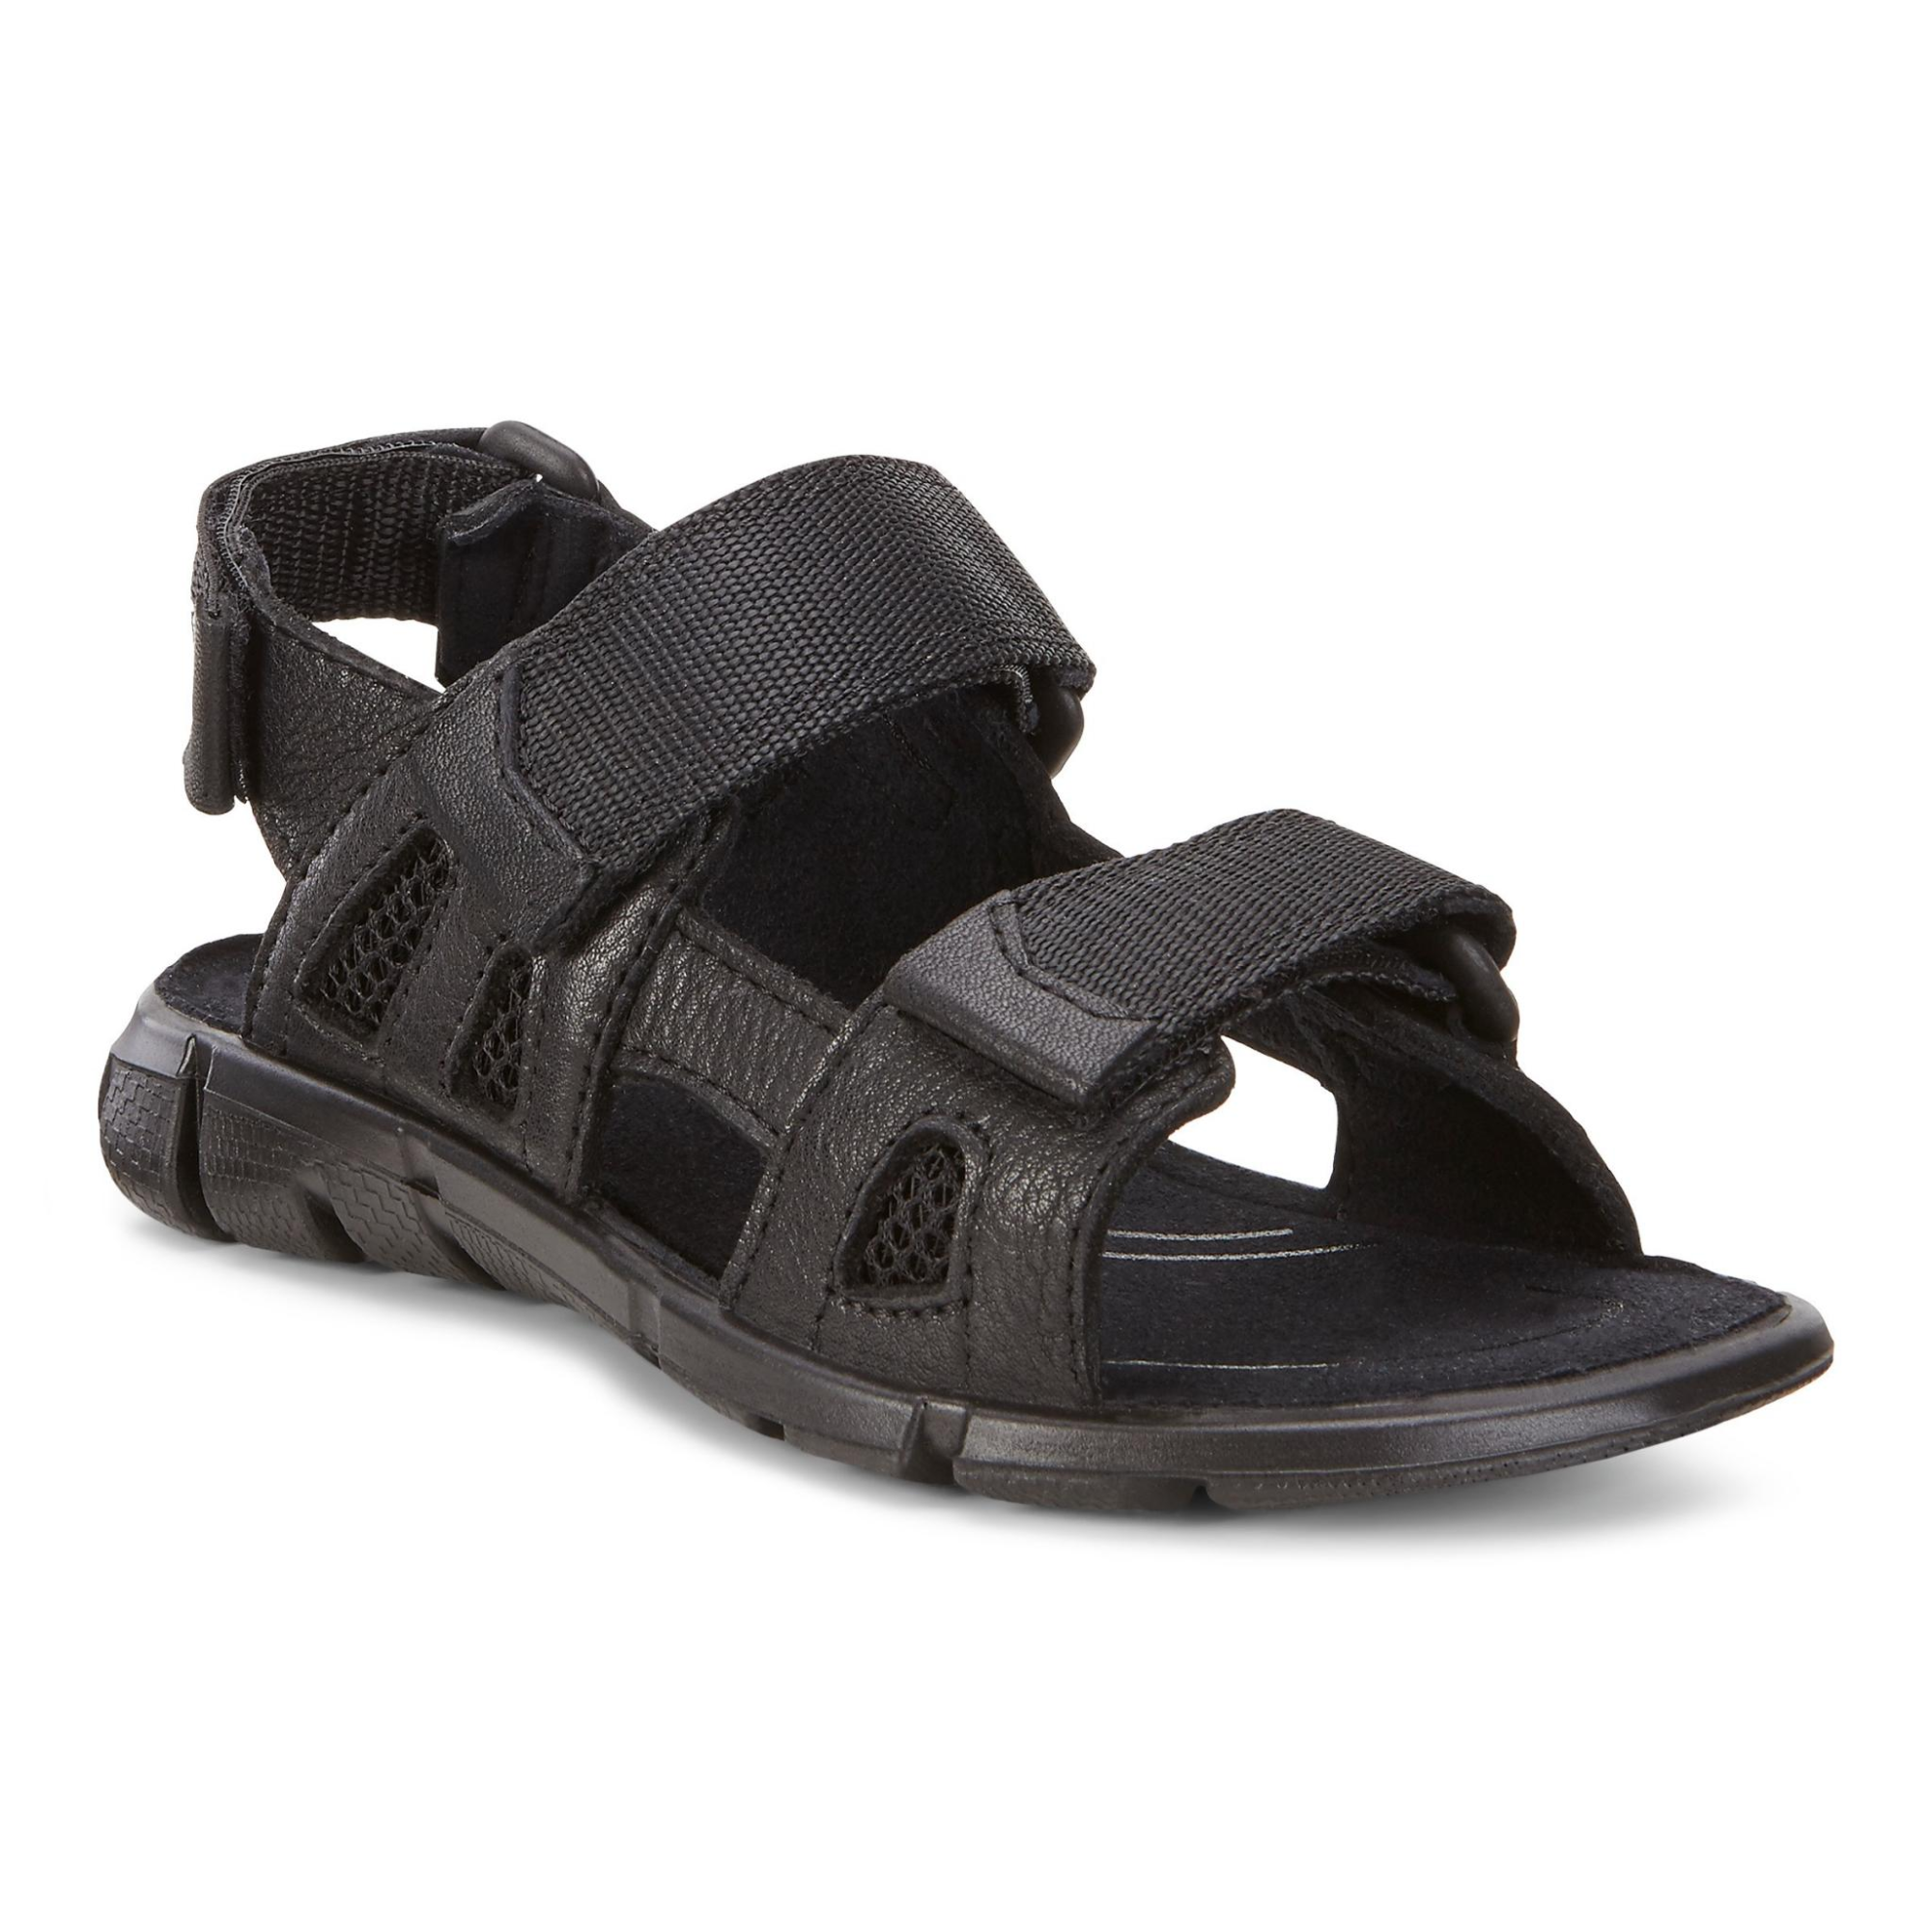 Ecco Intrinsic Kids Sandal 27 - Products - Veryk Mall - Veryk Mall, product, quick response, your money!